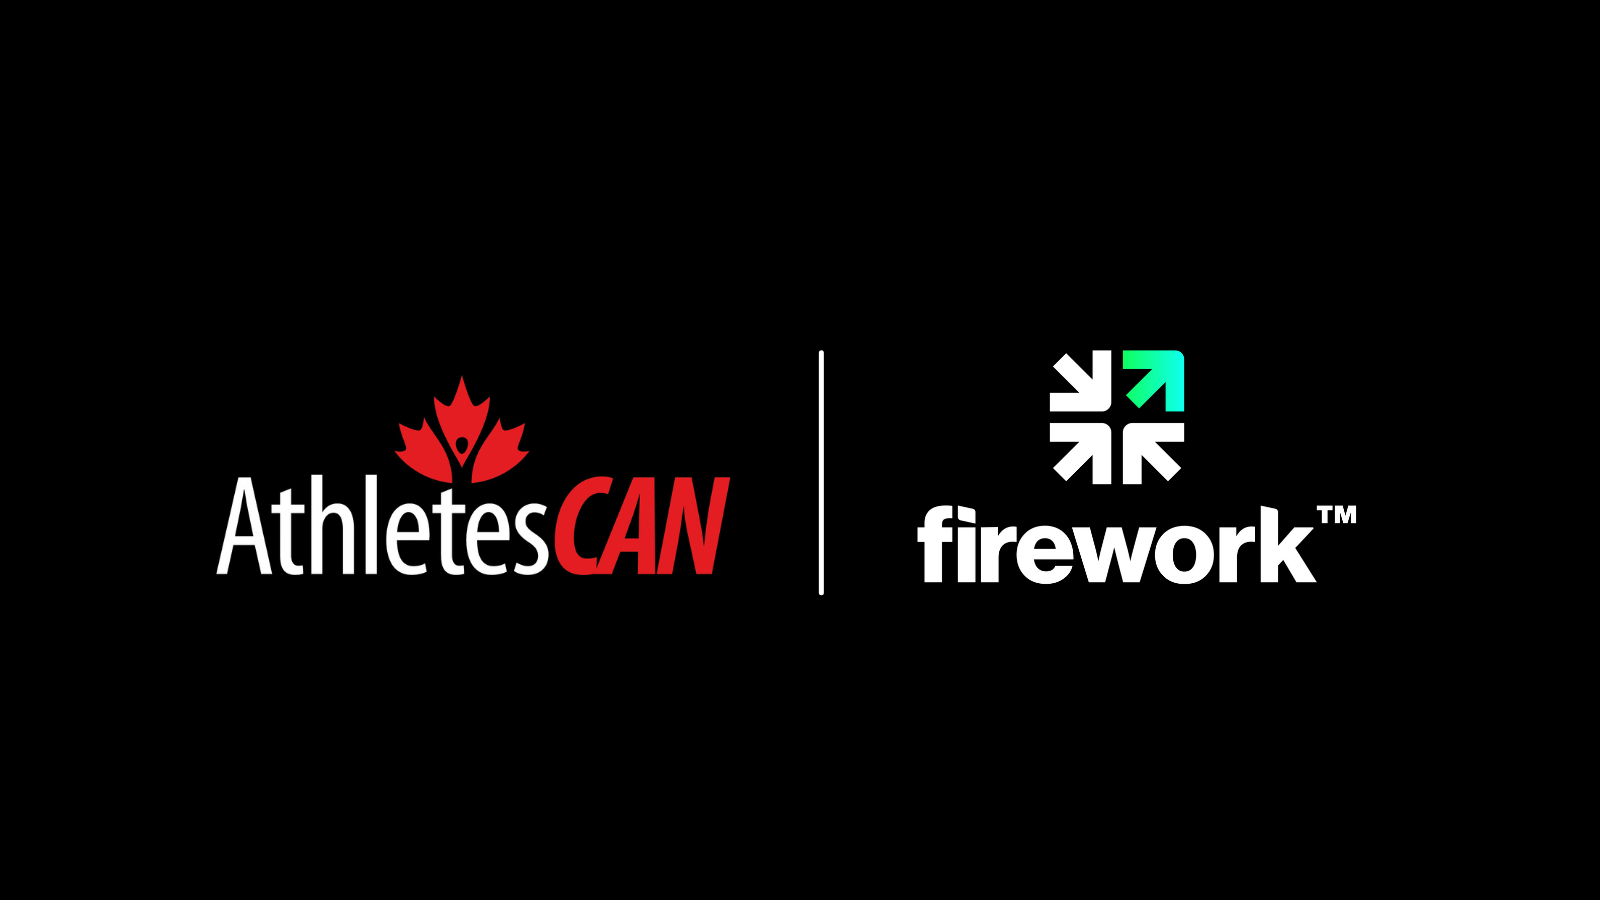 Athletescan, Firework announce two-year partnership aimed at growing athlete promotional funding marketplace